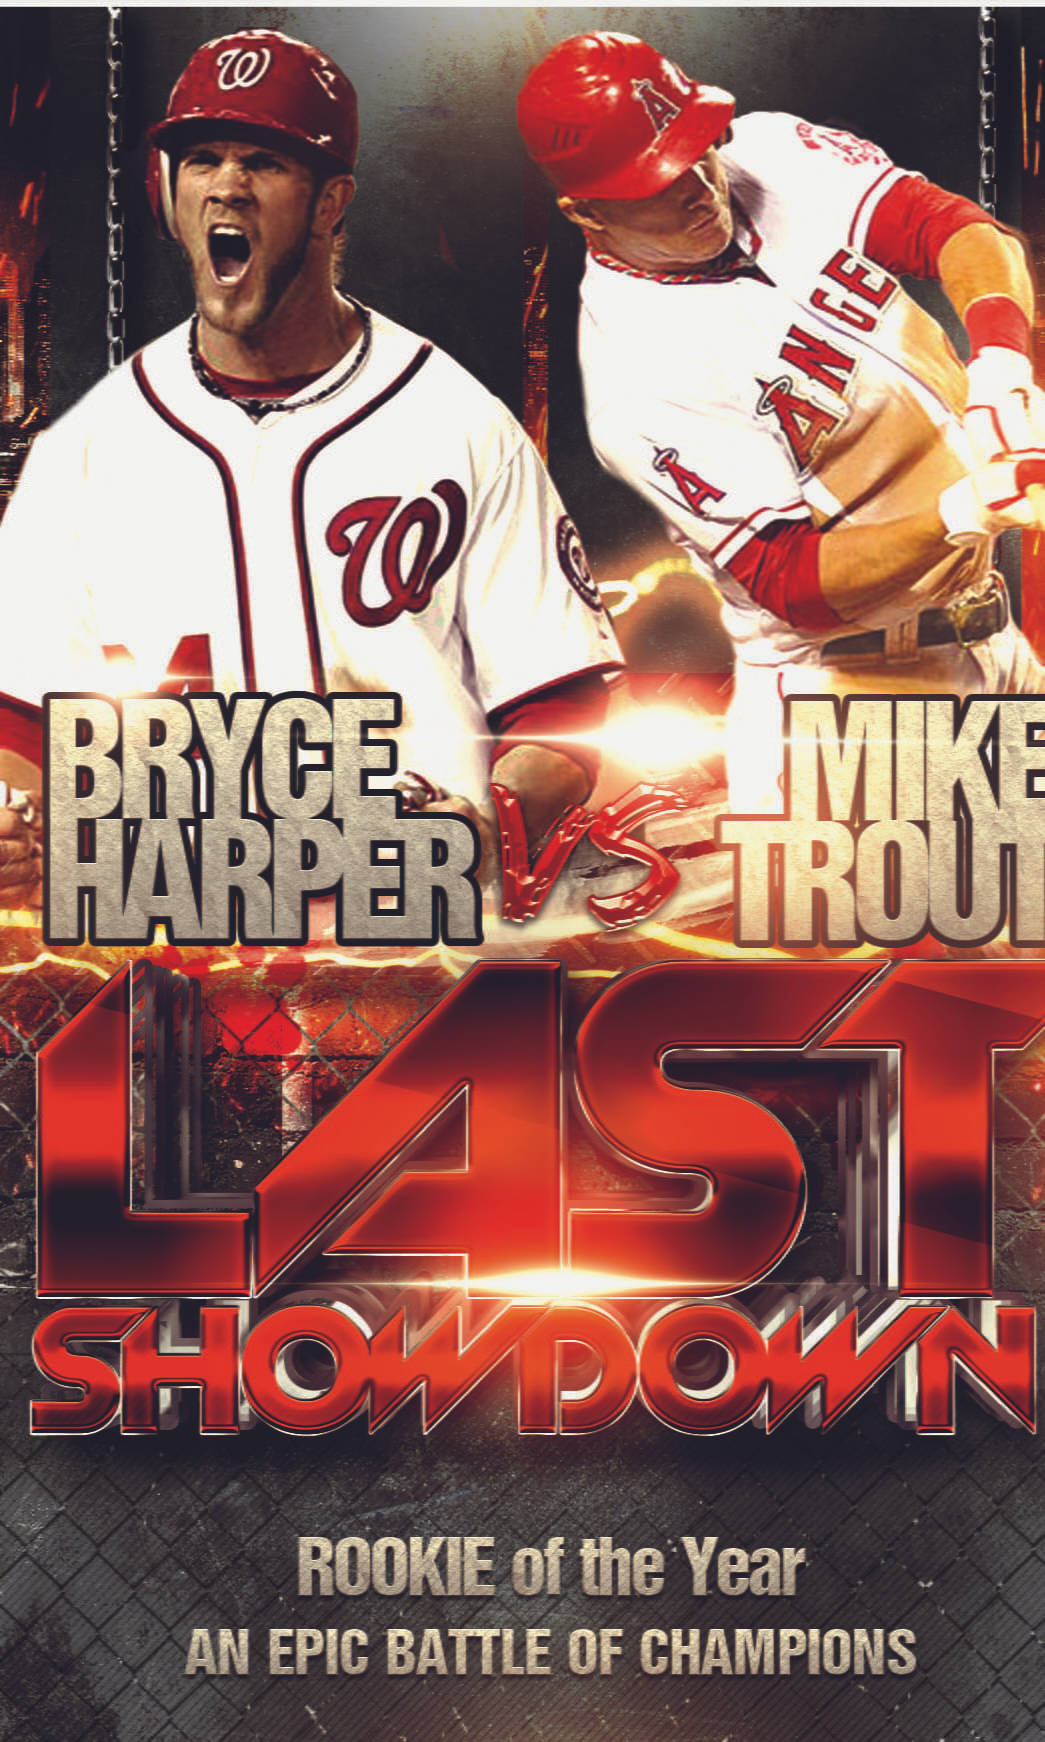 Mike Trout Vs. Harper Poster Background